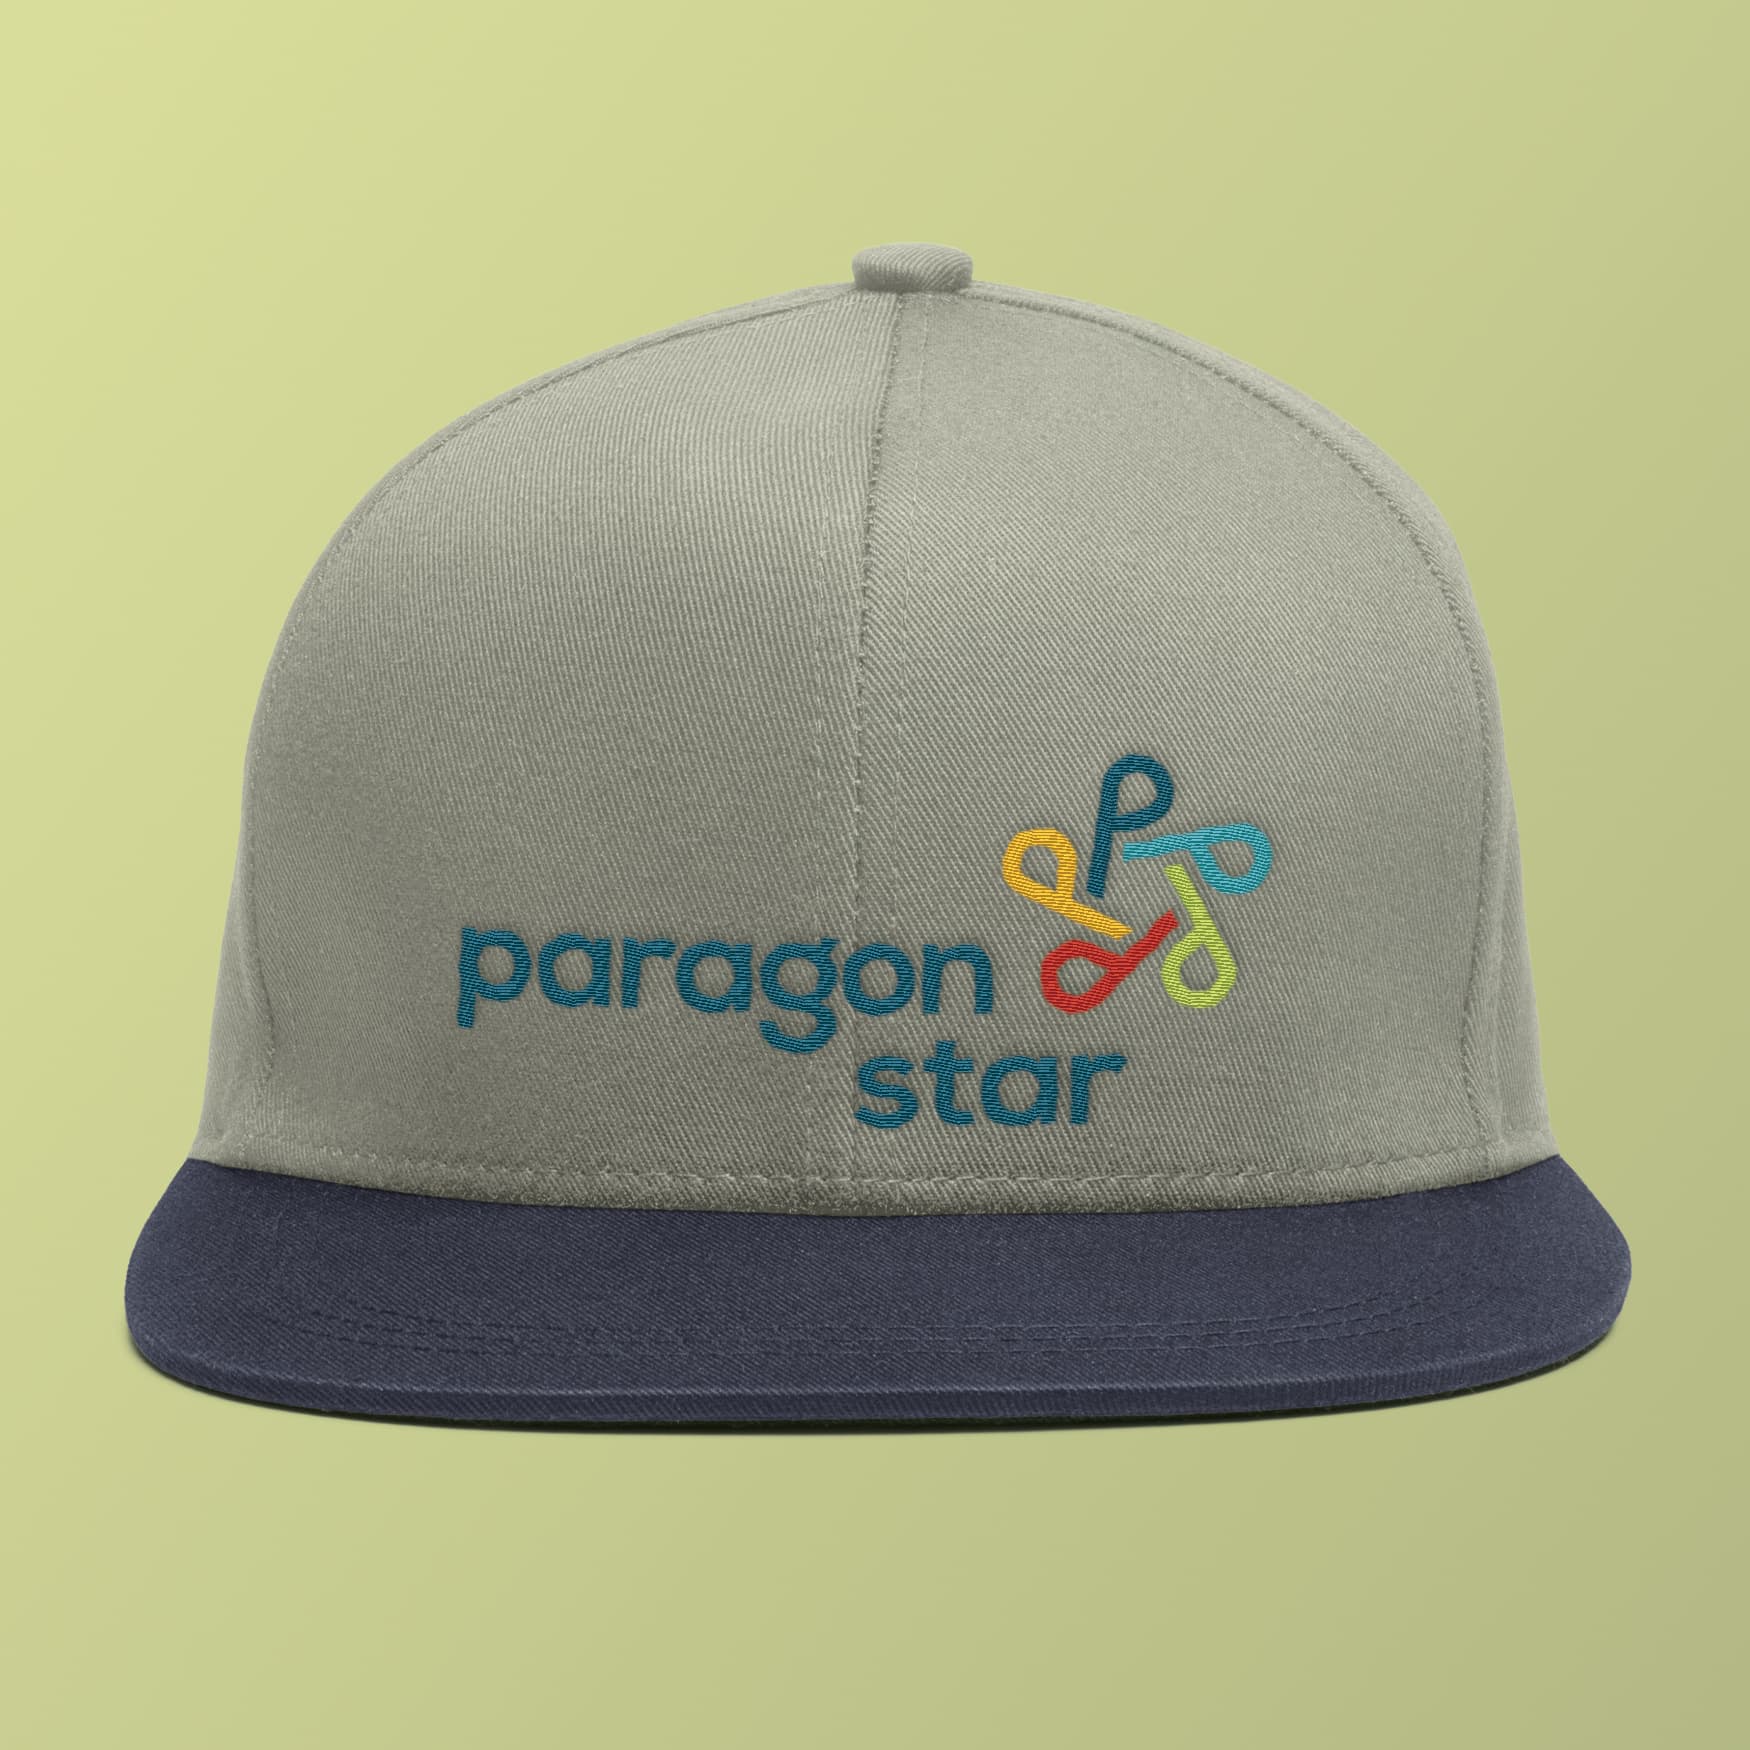 Gray hat with Paragon Star logo.